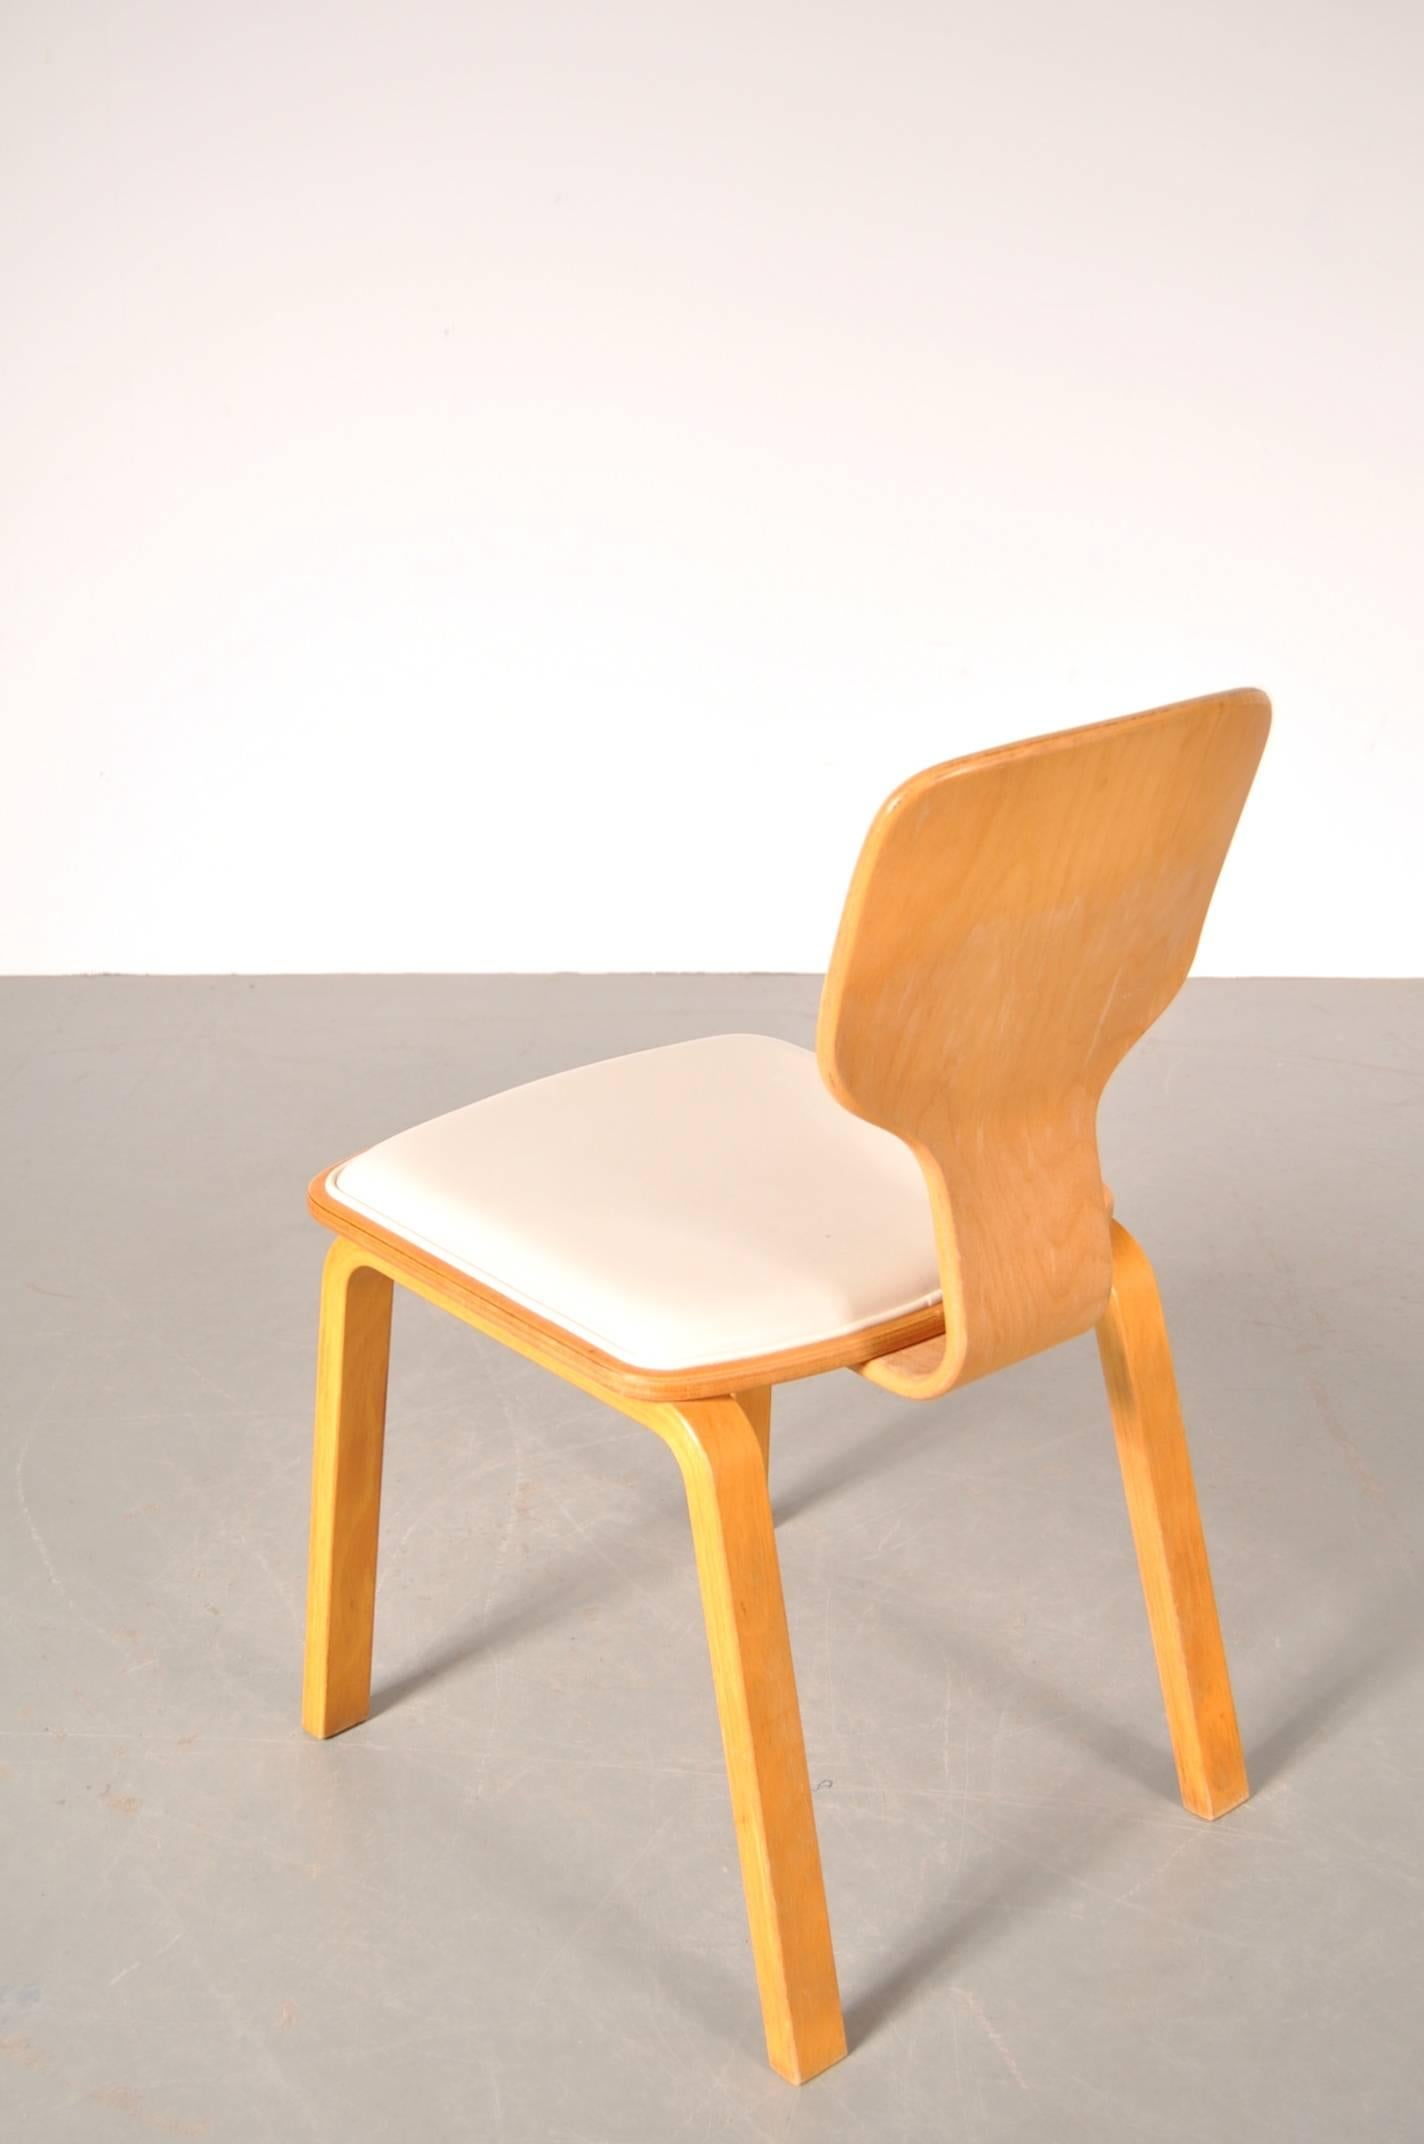 Late 20th Century Set of Four Dining Chairs Model T-0635B by Katsuo Matsumura for Tendo, Japan